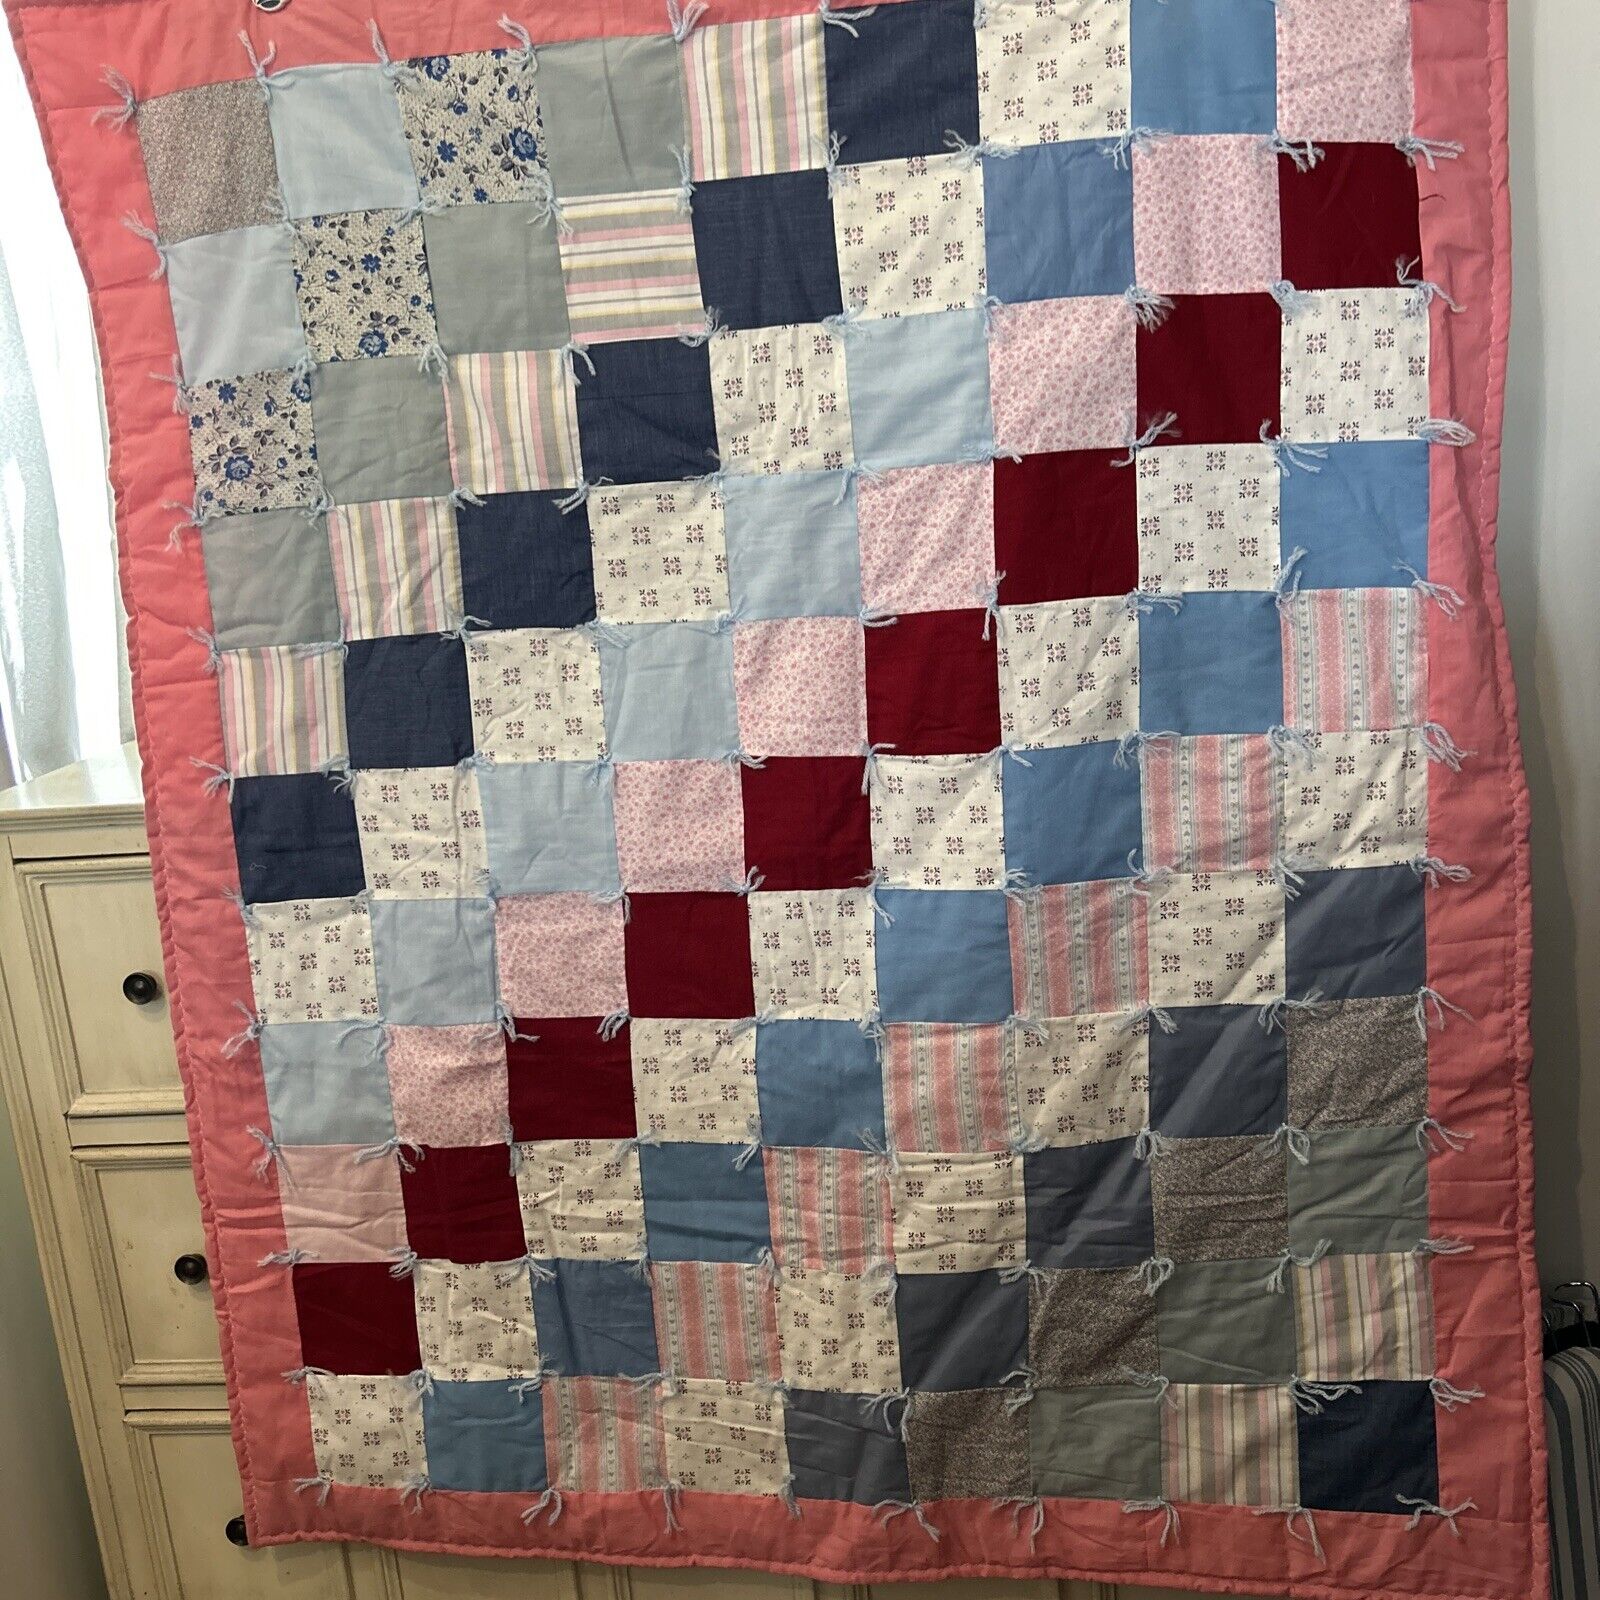 Knotted Pinks & Blues Amish Quilt Wall-Hanging 40” by 48” New